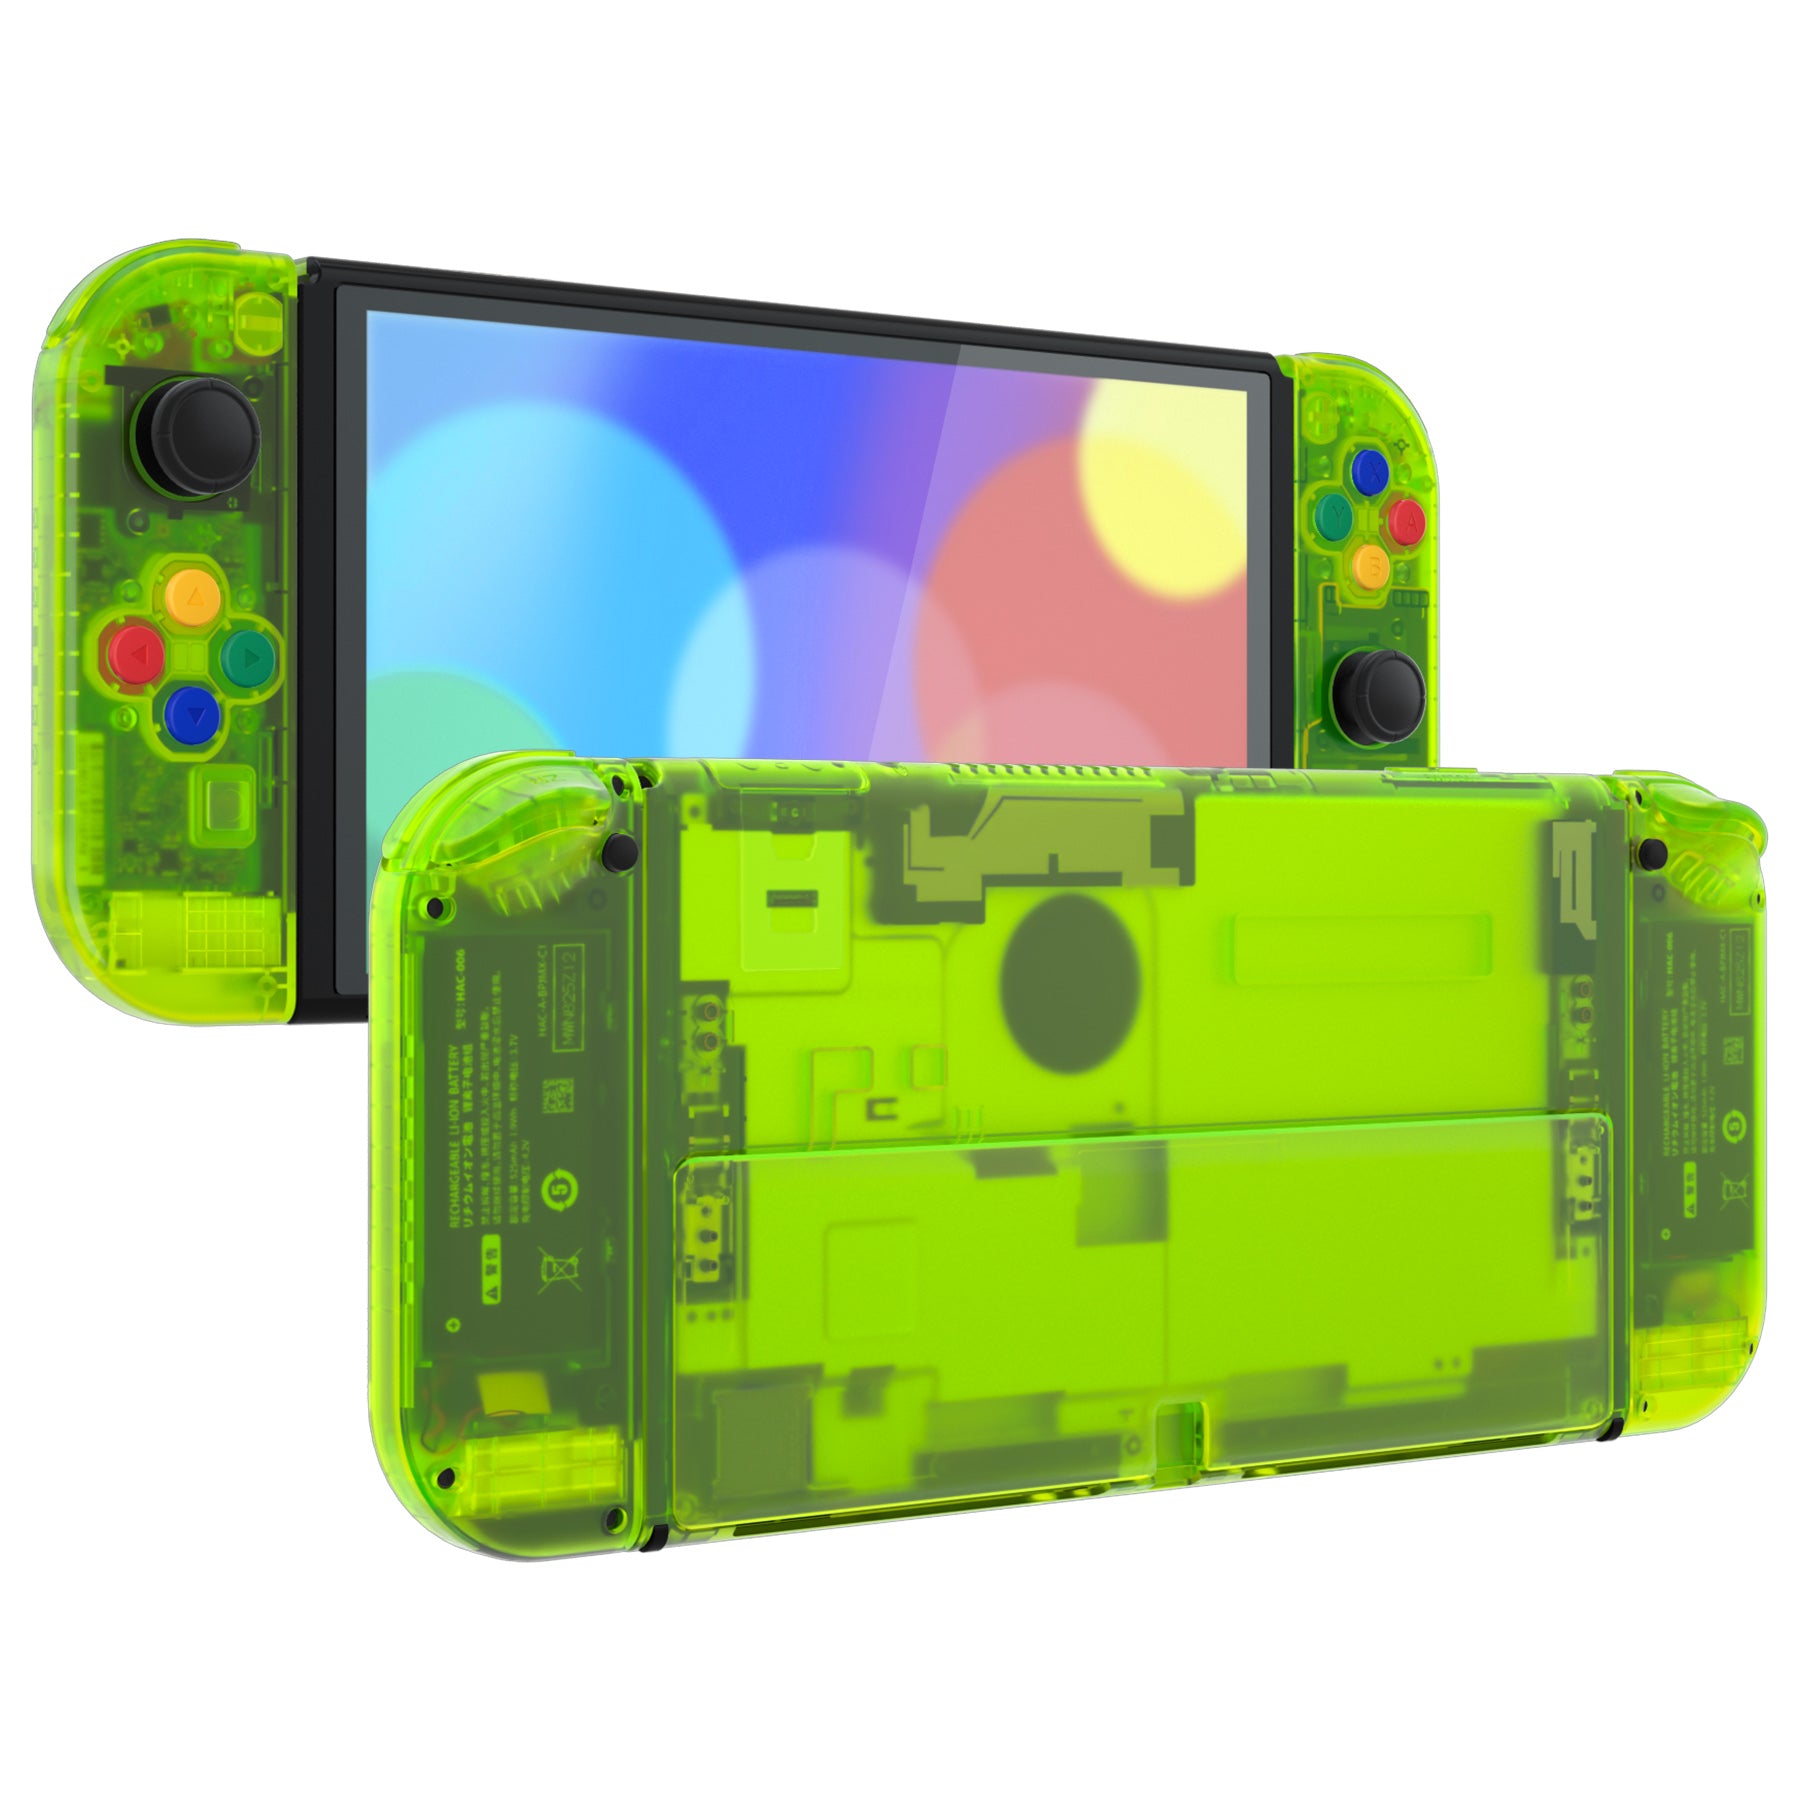 eXtremeRate Retail Clear Lime Green Custom Full Set Shell for Nintendo Switch OLED, DIY Replacement Console Back Plate & Kickstand, NS Joycon Handheld Controller Housing with Colorful Buttons for Nintendo Switch OLED - QNSOM5008